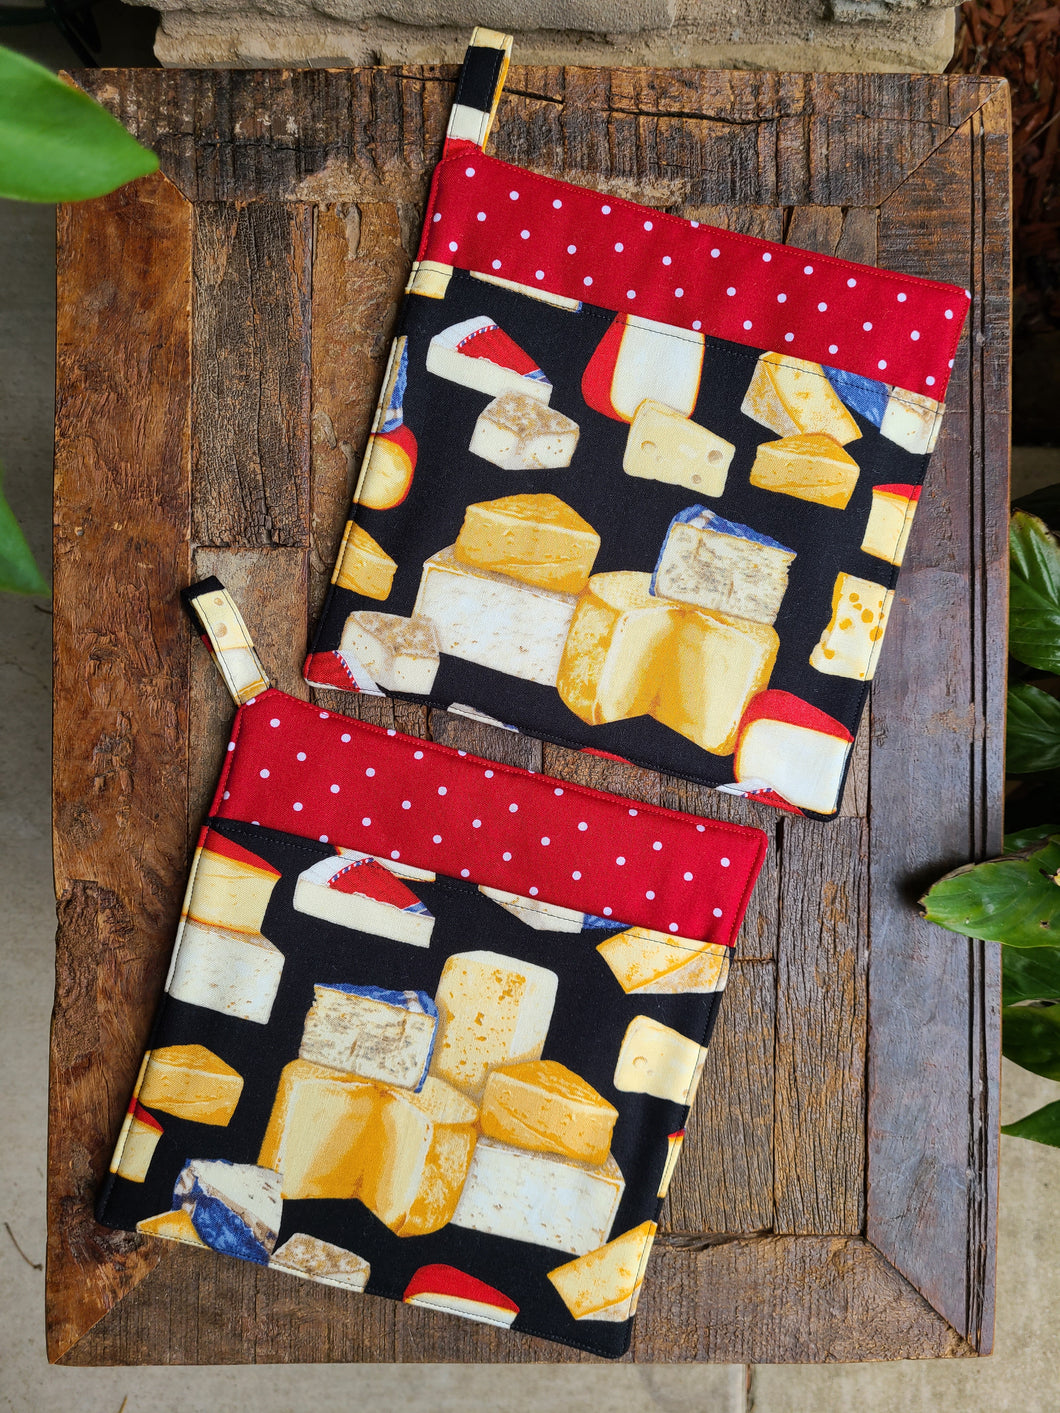 Hot Pad Set - Set Of Two - Cheese - Blue Cheese - Gouda - Swiss Cheese - Cheddar Cheese - Hot Pads - Trivet